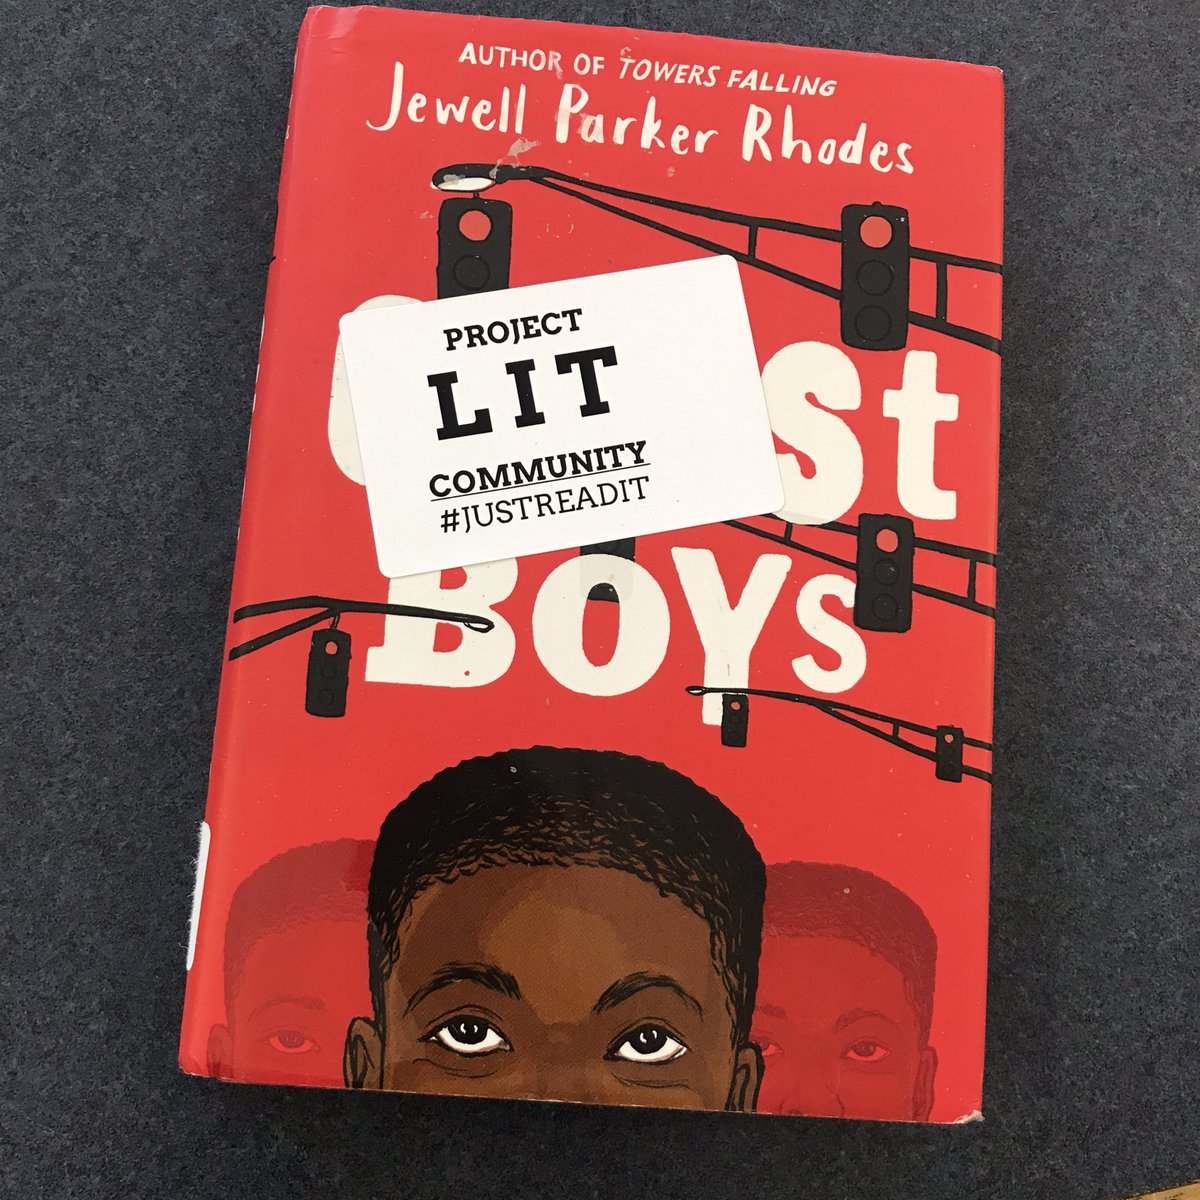 Another #projectlit bookclub starting today! Our students @ParkAveElemMnps have voted on #GhostBoys by @jewell_p_rhodes @MNPSLibraries